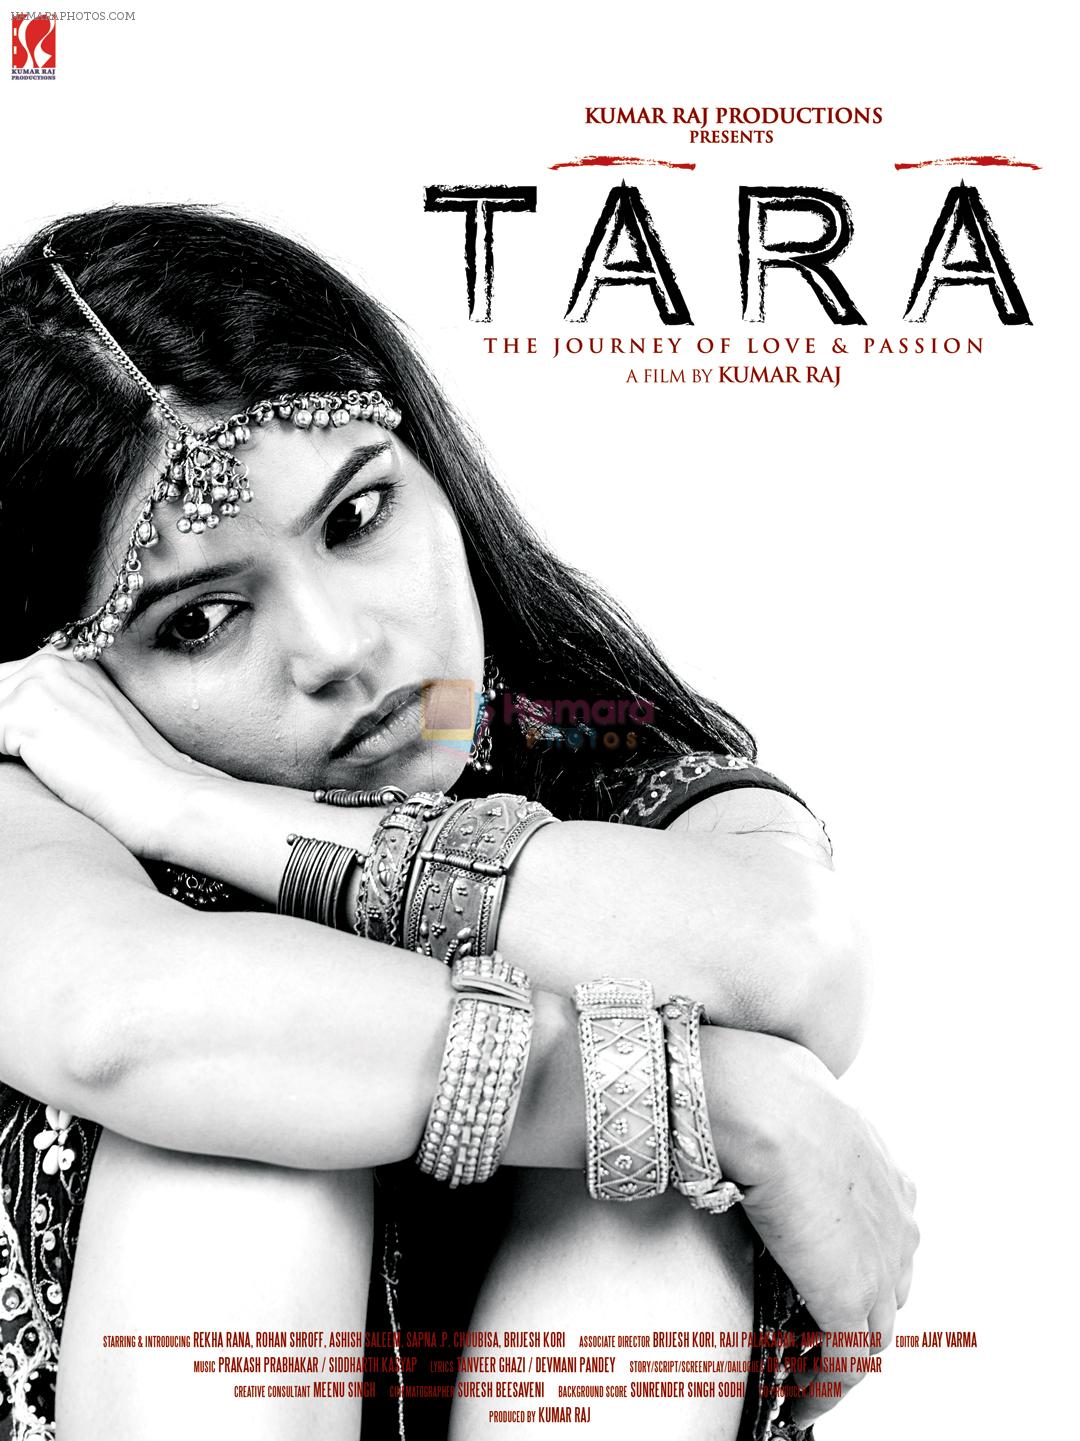 Rekha Rana Received Best Actress for Tara the journey of Love and passion in Jaipur international film festival